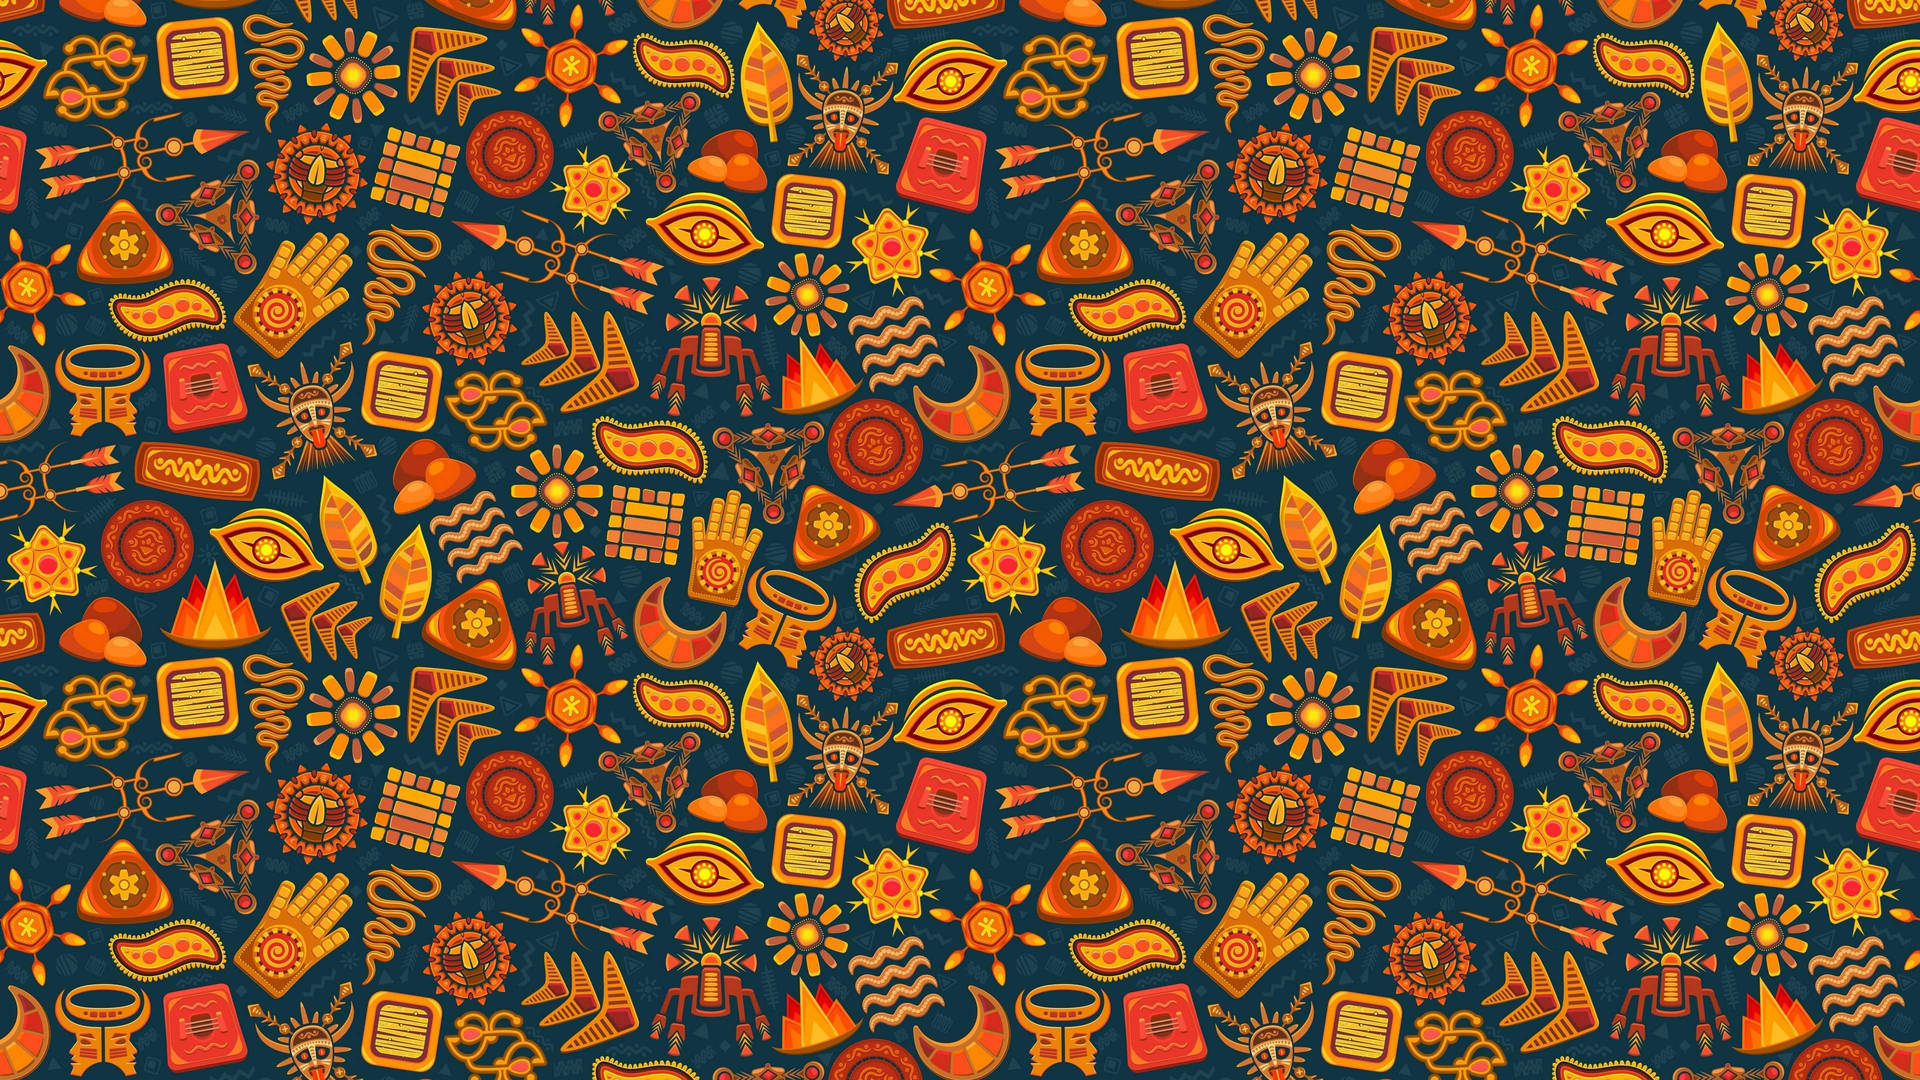 Set of vibrantly-colored Aztec-inspired icons and patterns for designs Wallpaper